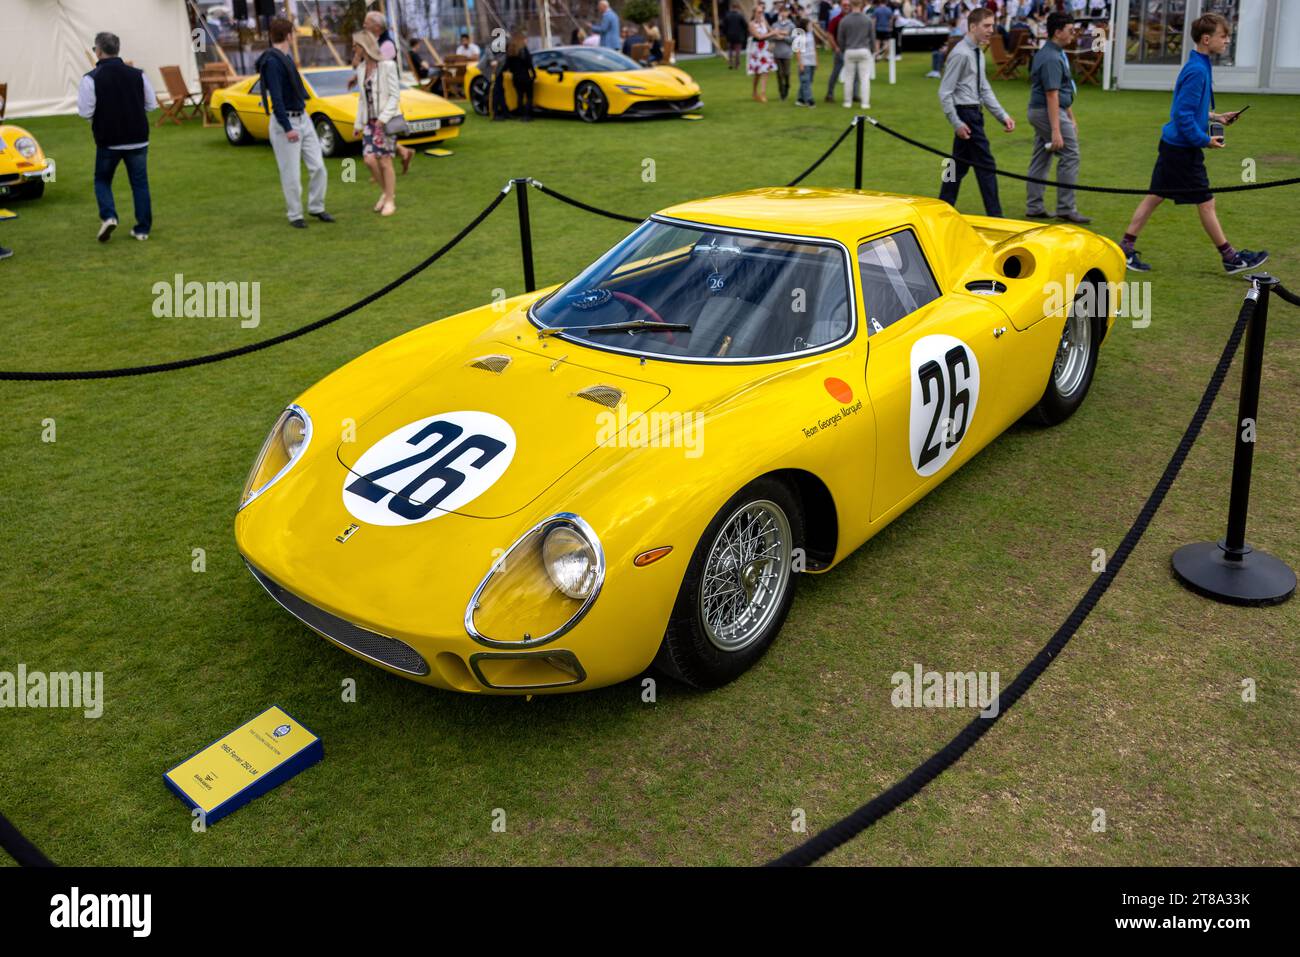 1965 Ferrari 250 LM, on display at the Salon Privé Concours d’Elégance motor show held at Blenheim Palace. Stock Photo